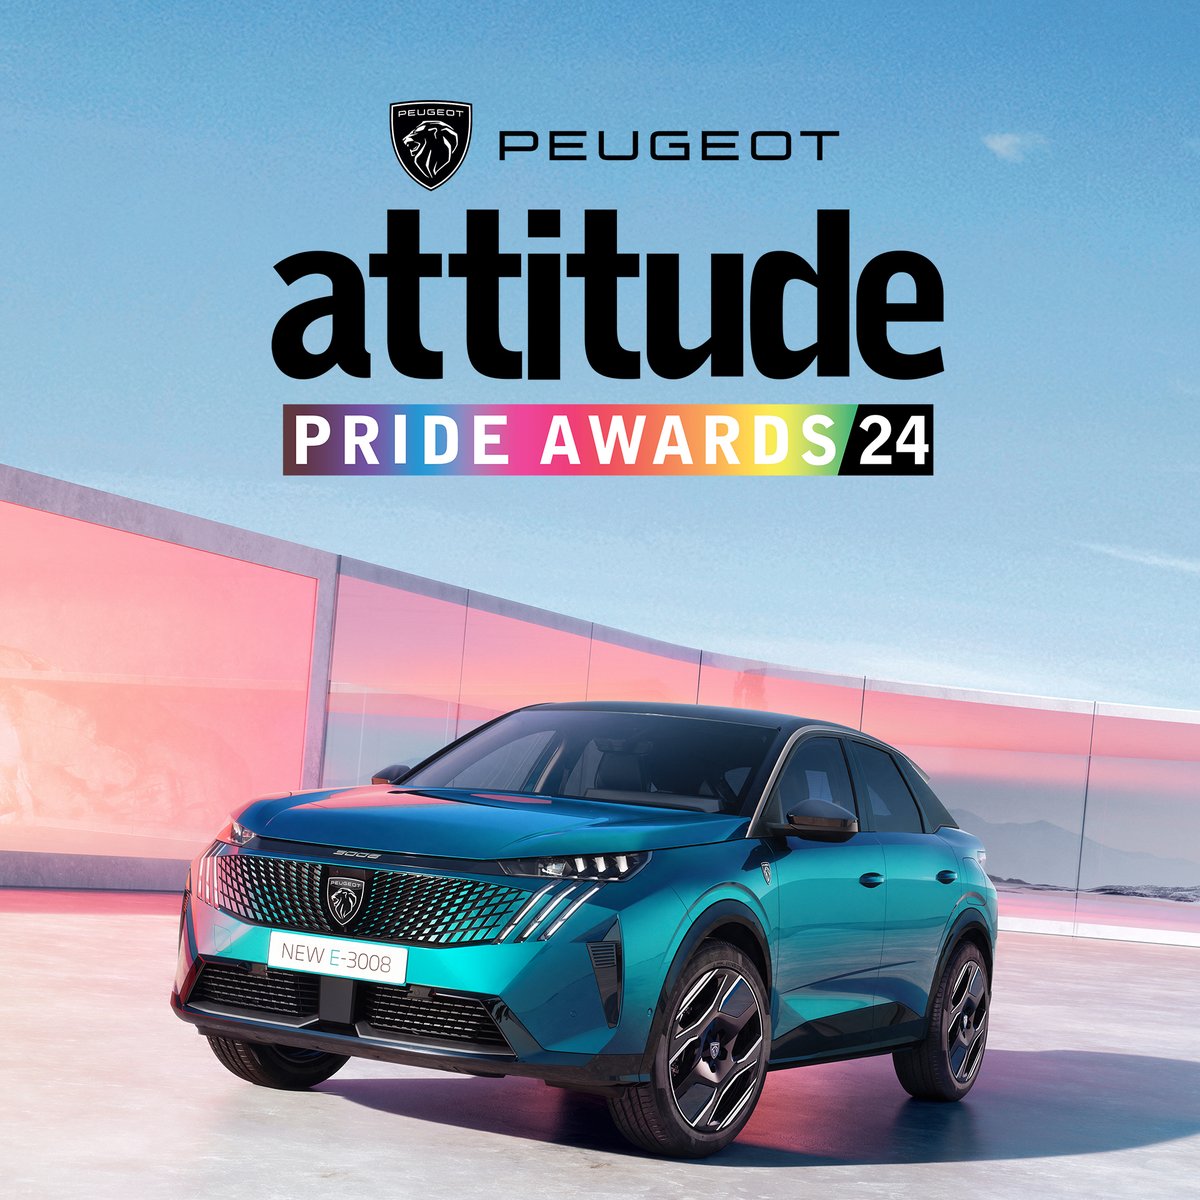 Attitude is seeking nominations for the 2024 @PeugeotUK Attitude Pride Awards ✨🏳️‍🌈 
Find out how to nominate here: tinyurl.com/8kfdwaht
#AttitudePrideAwards #PEUGEOTXAttitudePrideAwards